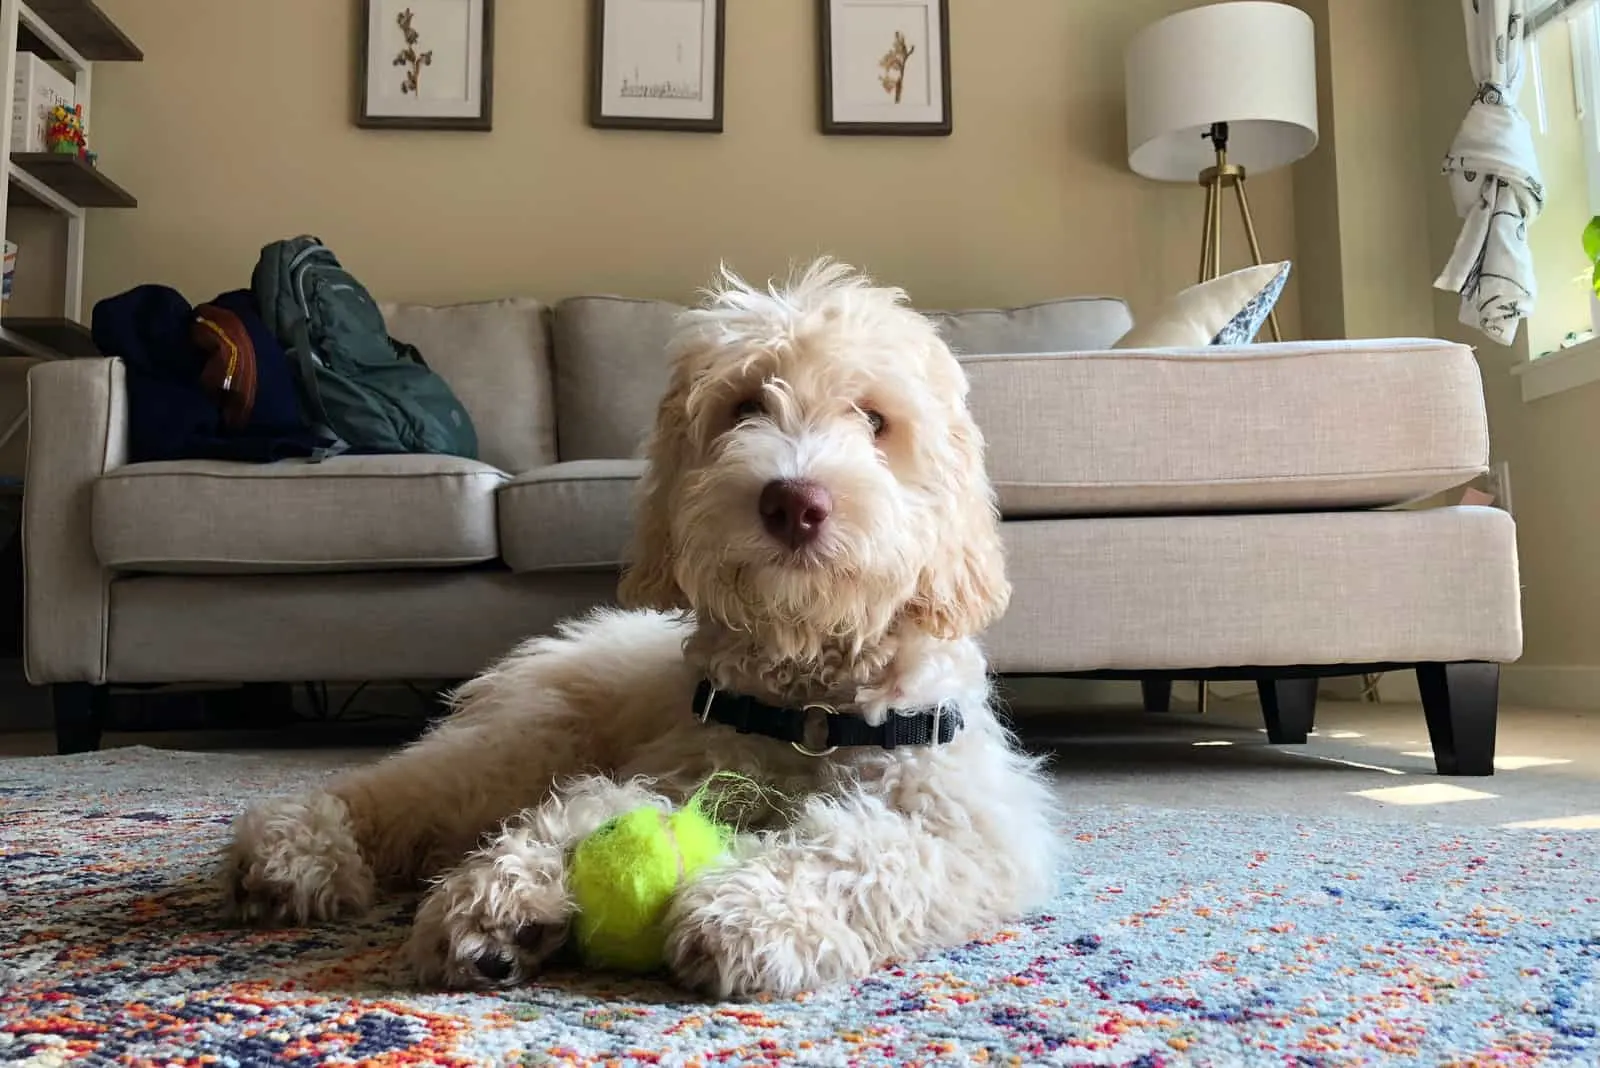 labradoodle is played with a ball on the floor of the room